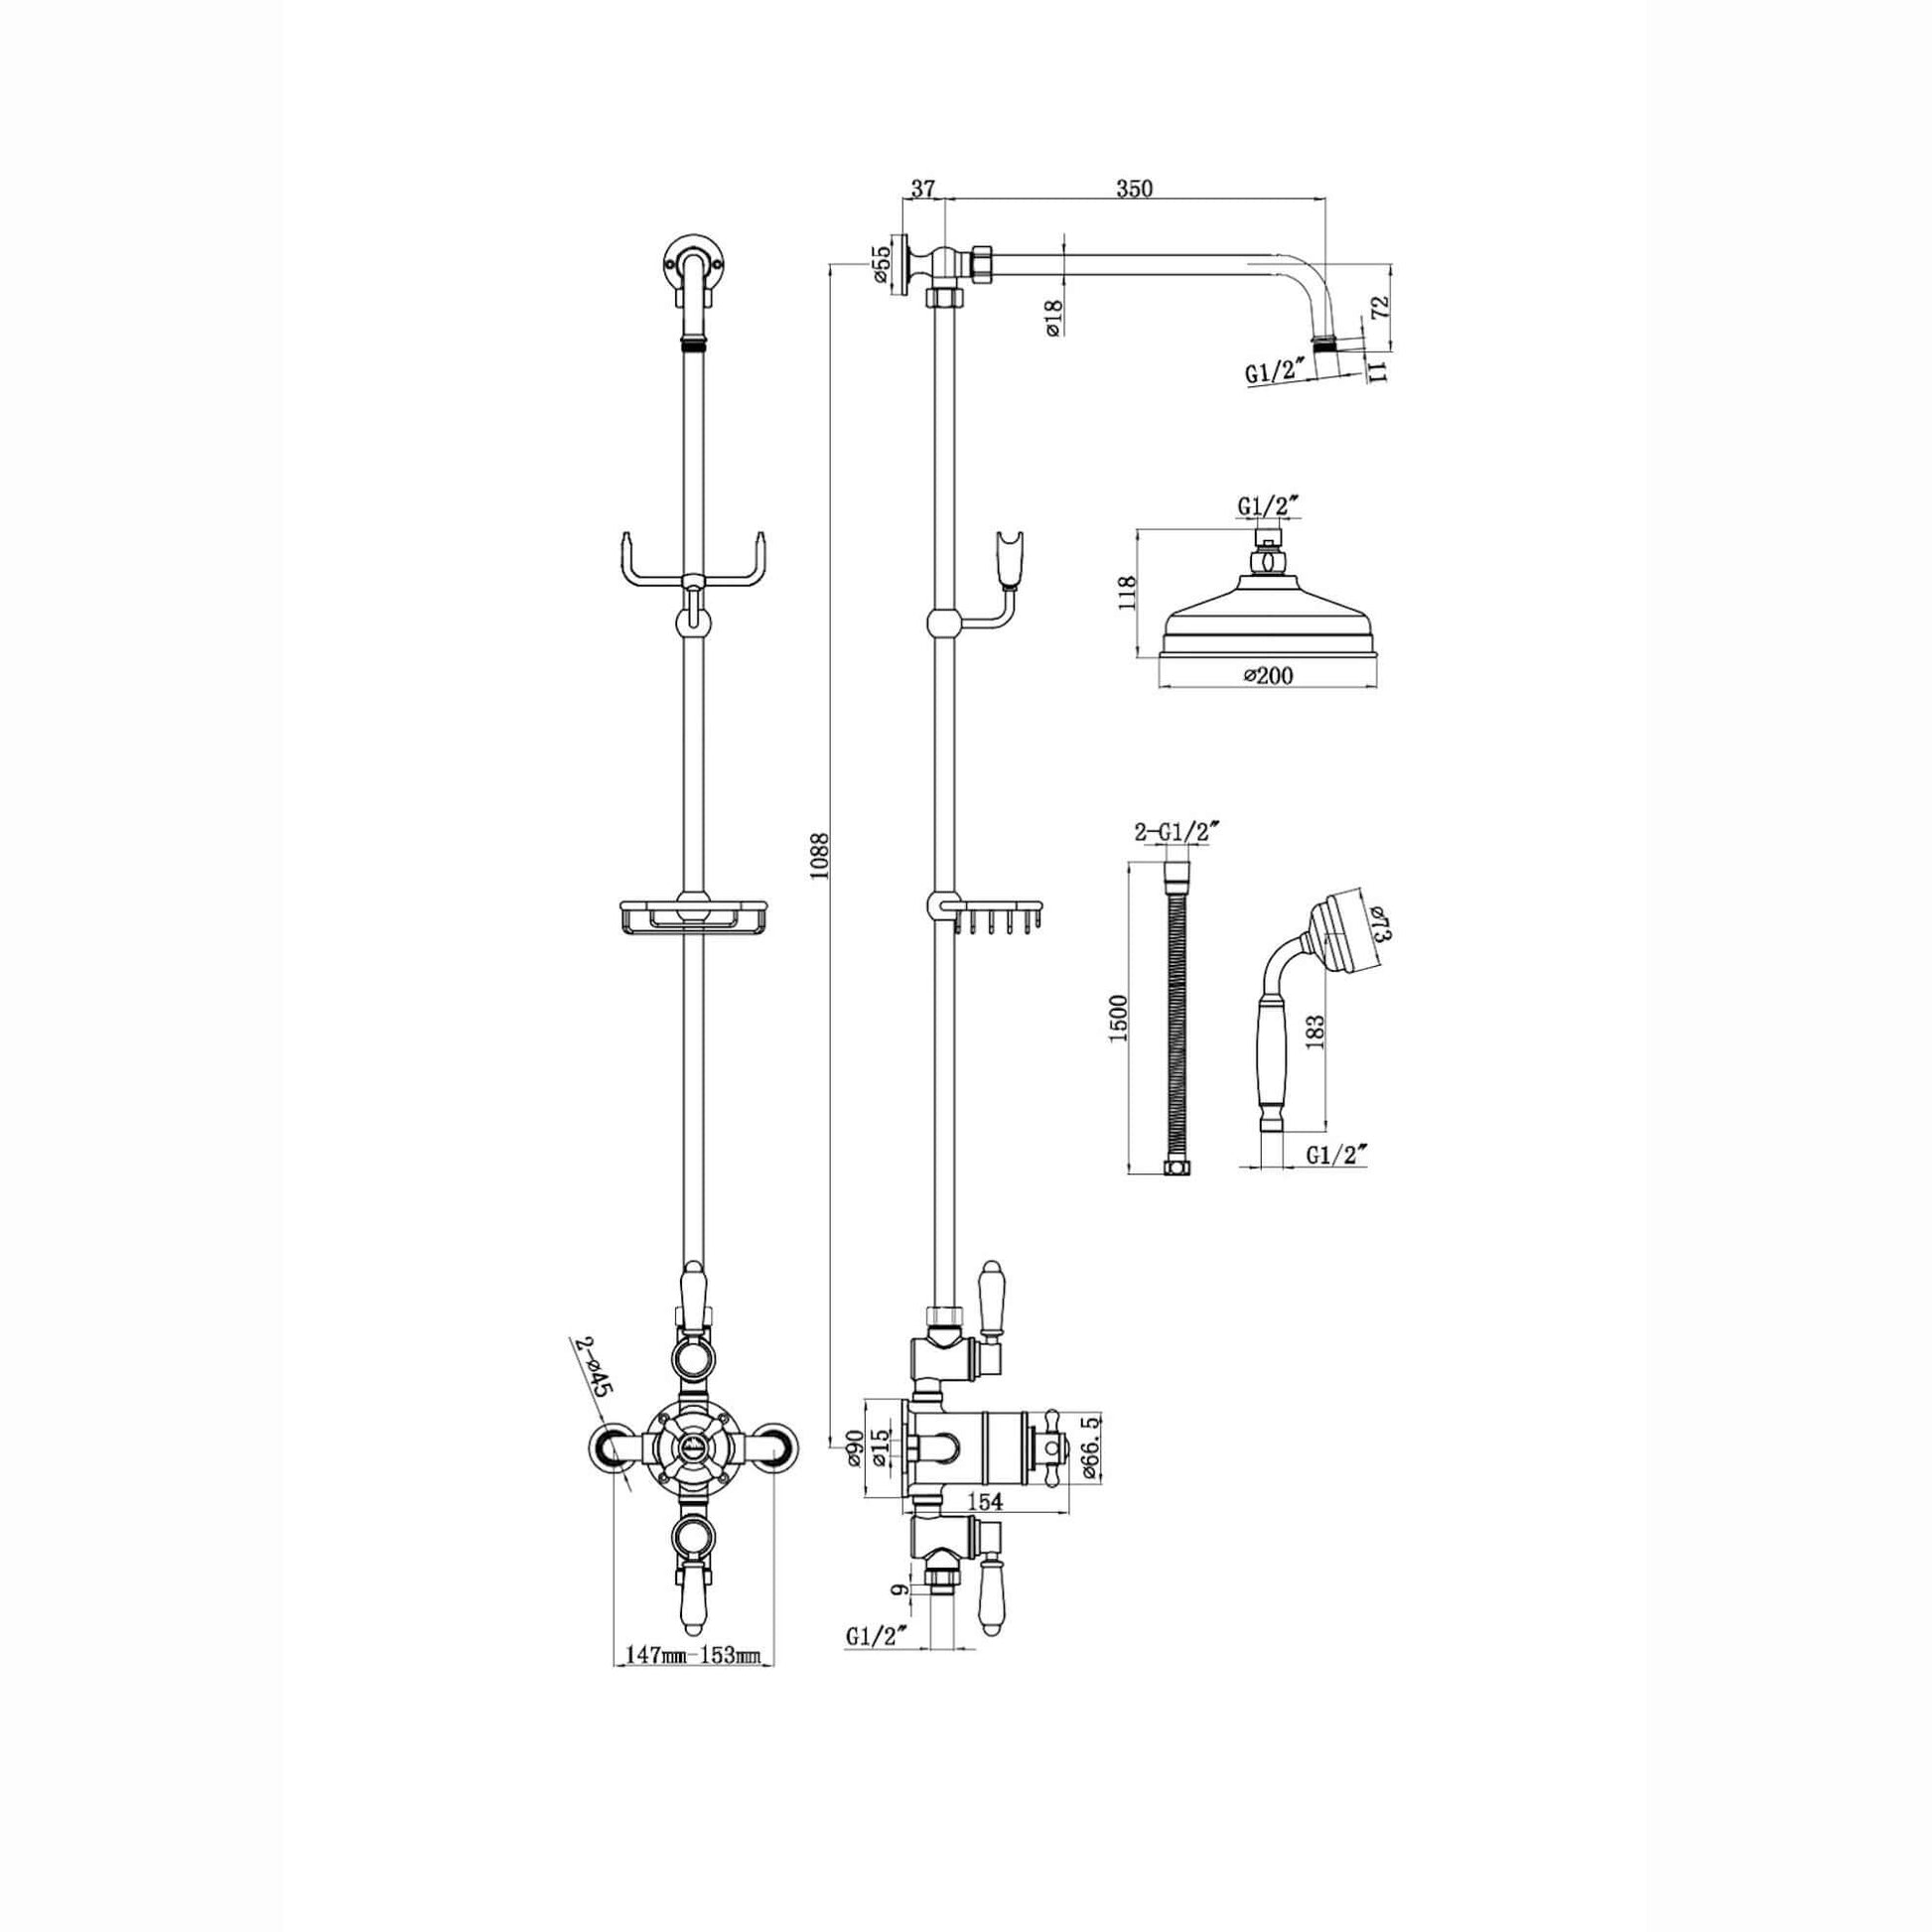 Downton Exposed Traditional Thermostatic Shower Set 2 Outlet, Incl. Triple Shower Valve, Rigid Riser Rail, 200mm Shower Head, Telephone Style Ceramic Handset & Caddy - Chrome And White - Showers